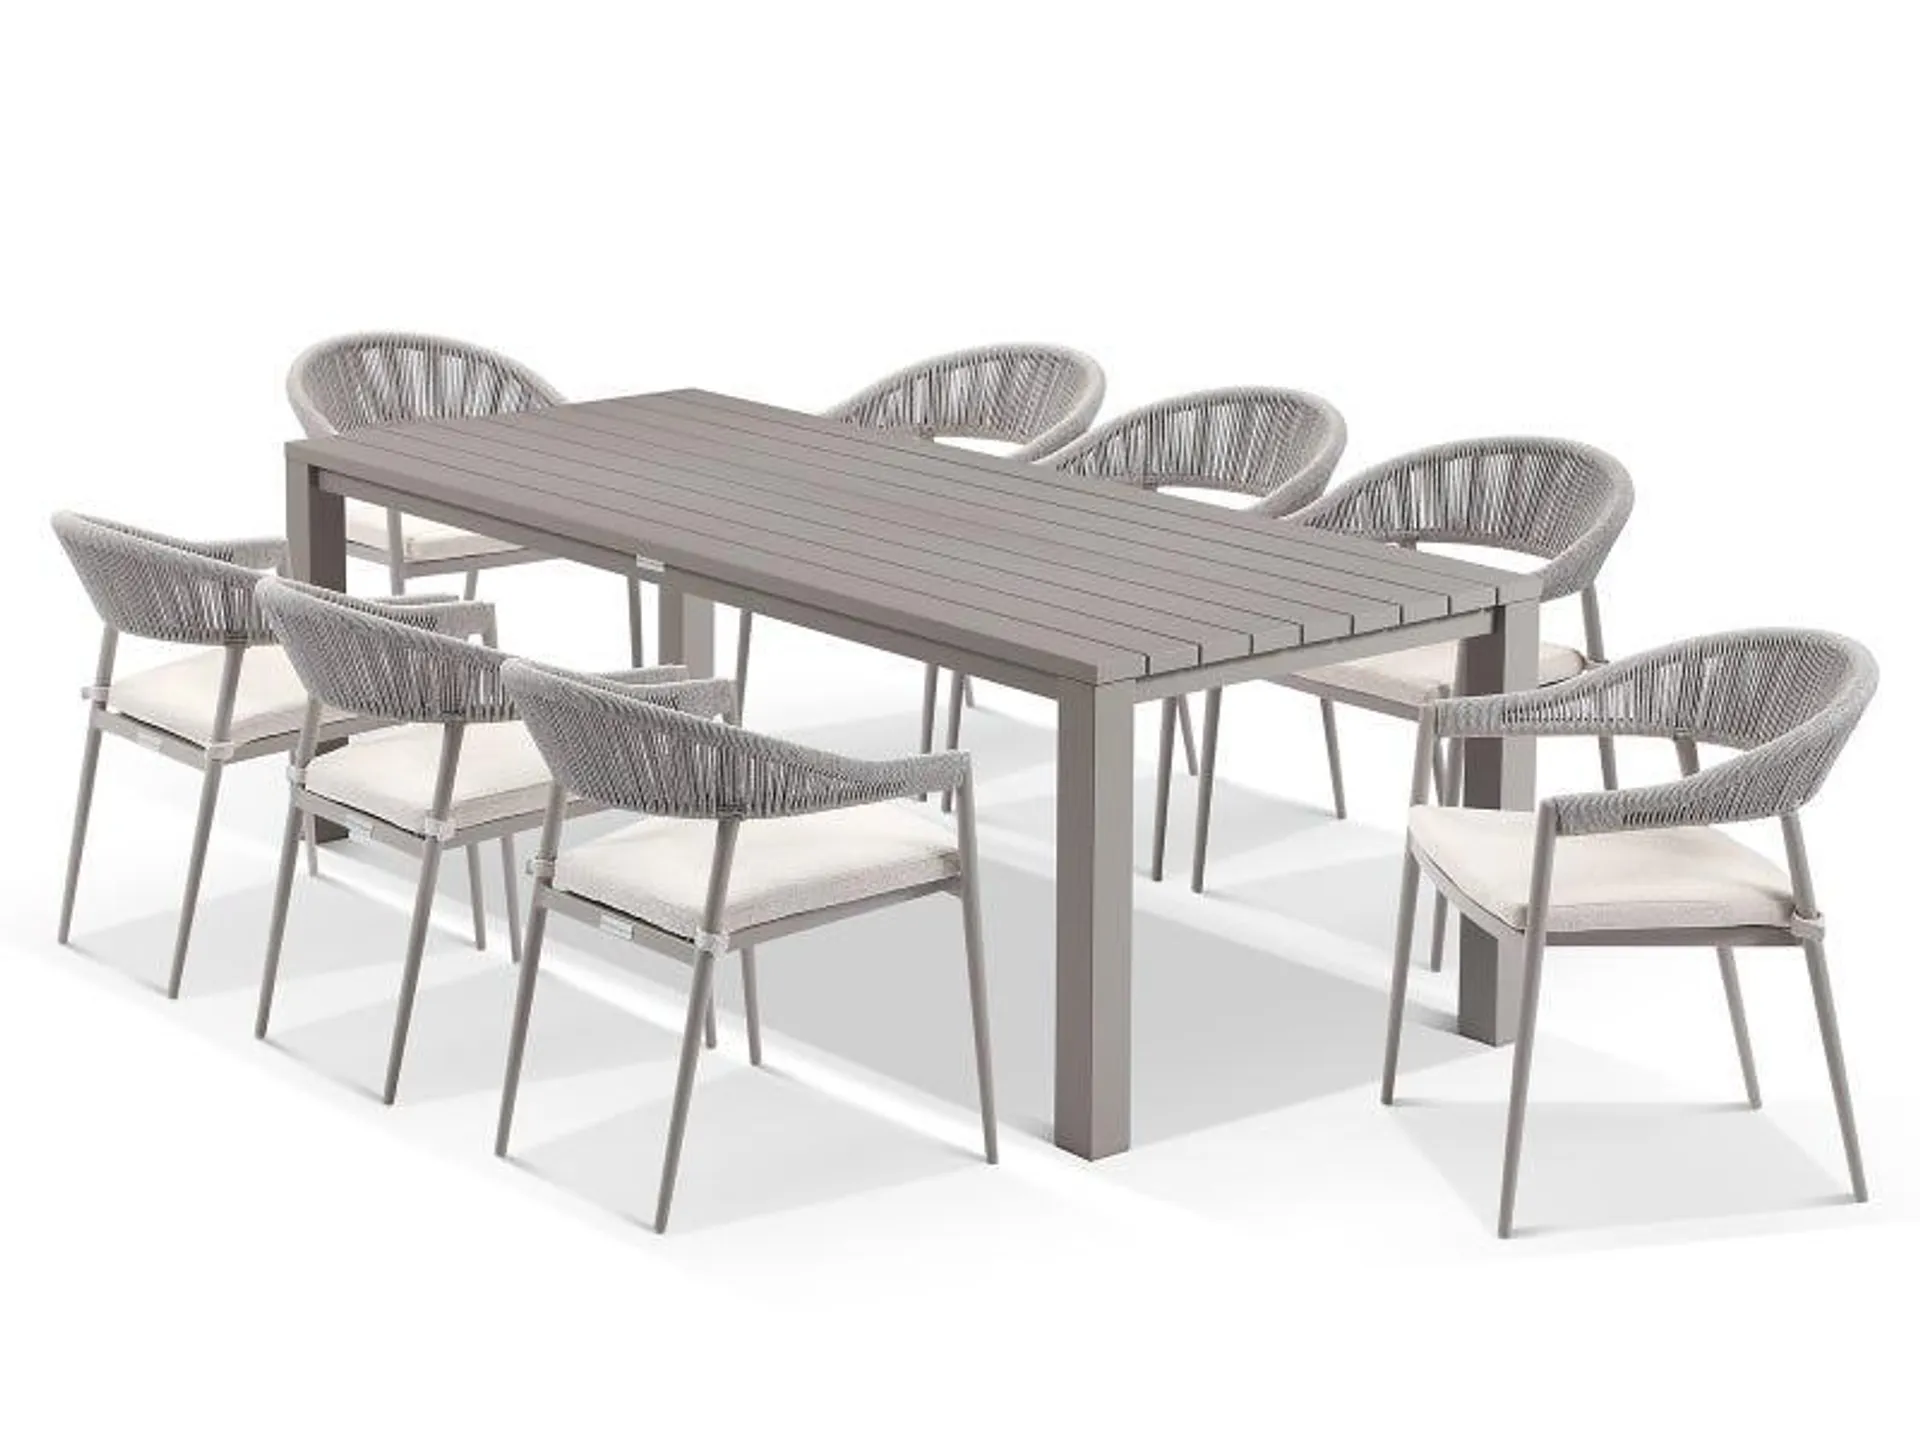 Adele Table With Nivala Chairs 9pc Outdoor Dining Setting